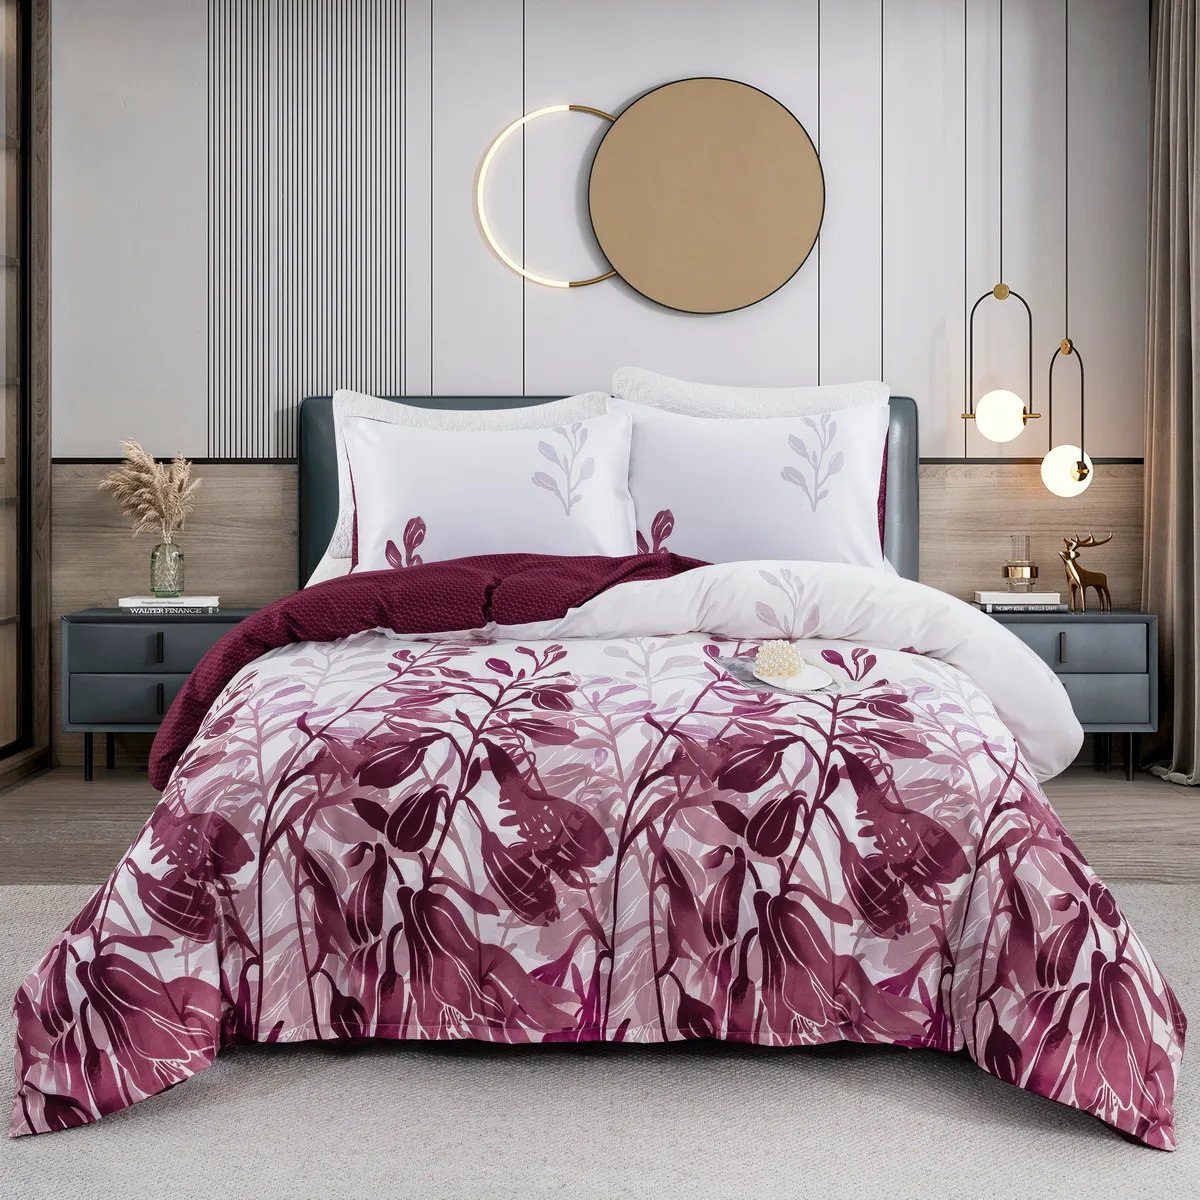 Red Leaf Series Bedding Set - Three-piece set including one quilt cover and two pillowcases WineRed big image 1